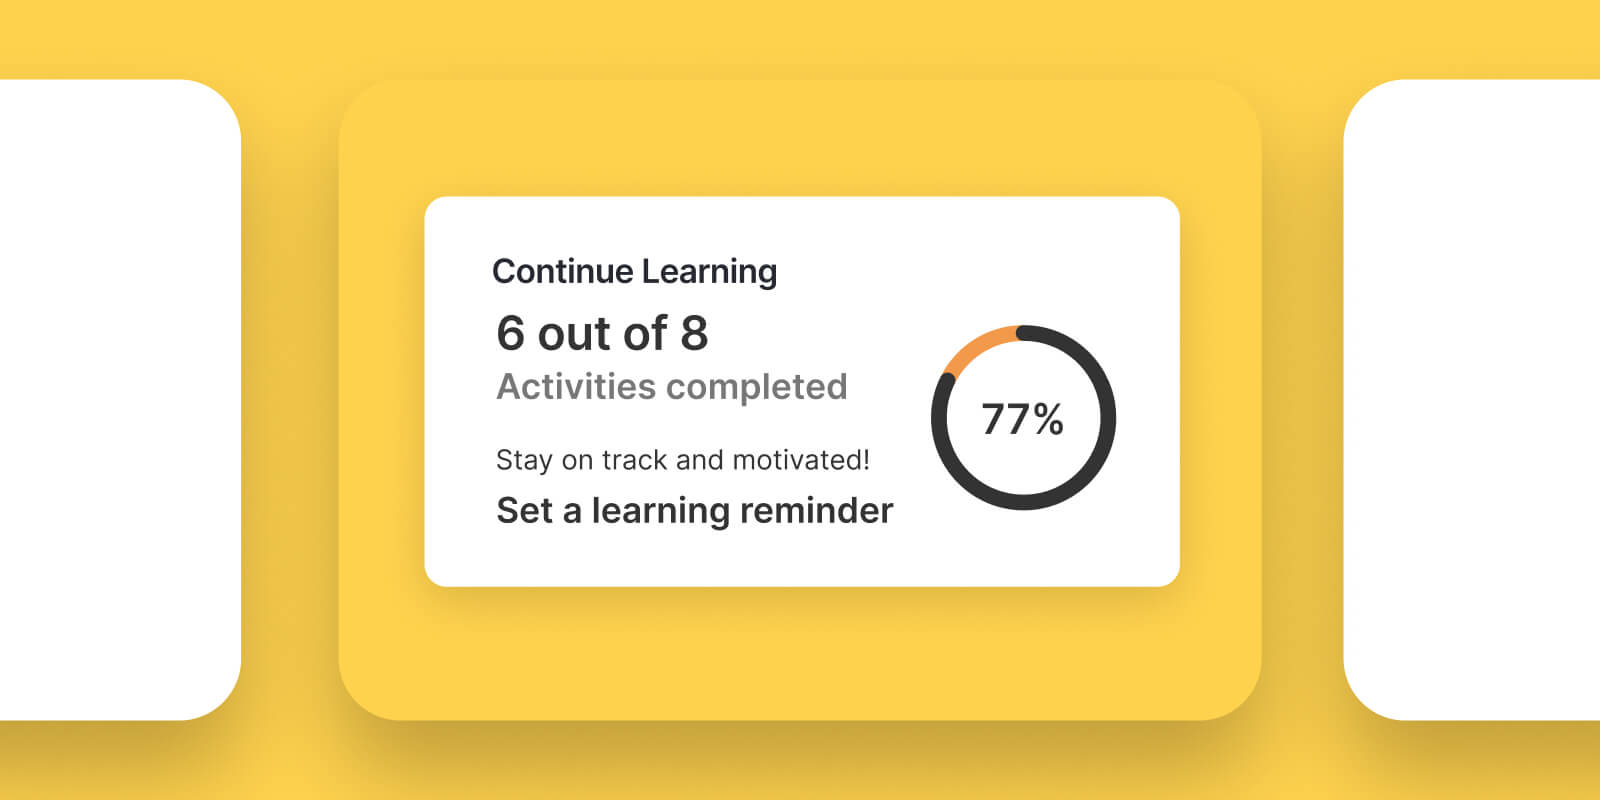 Introducing Learning Engagement Automations: Create Meaningful & Engaging Connections with Your Learners